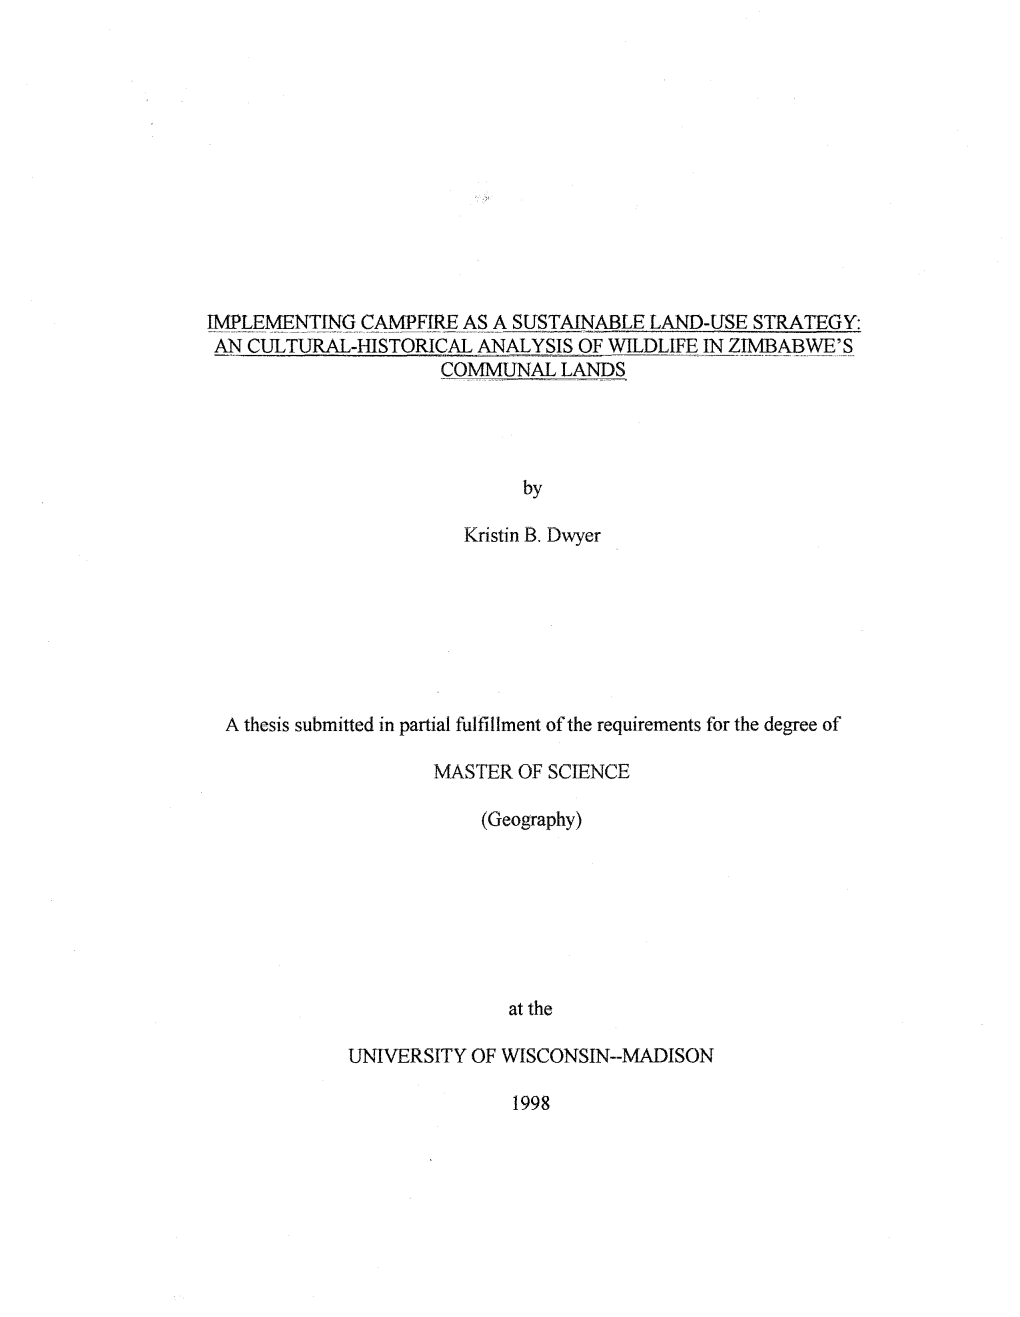 Masters Thesis (3.237Mb)